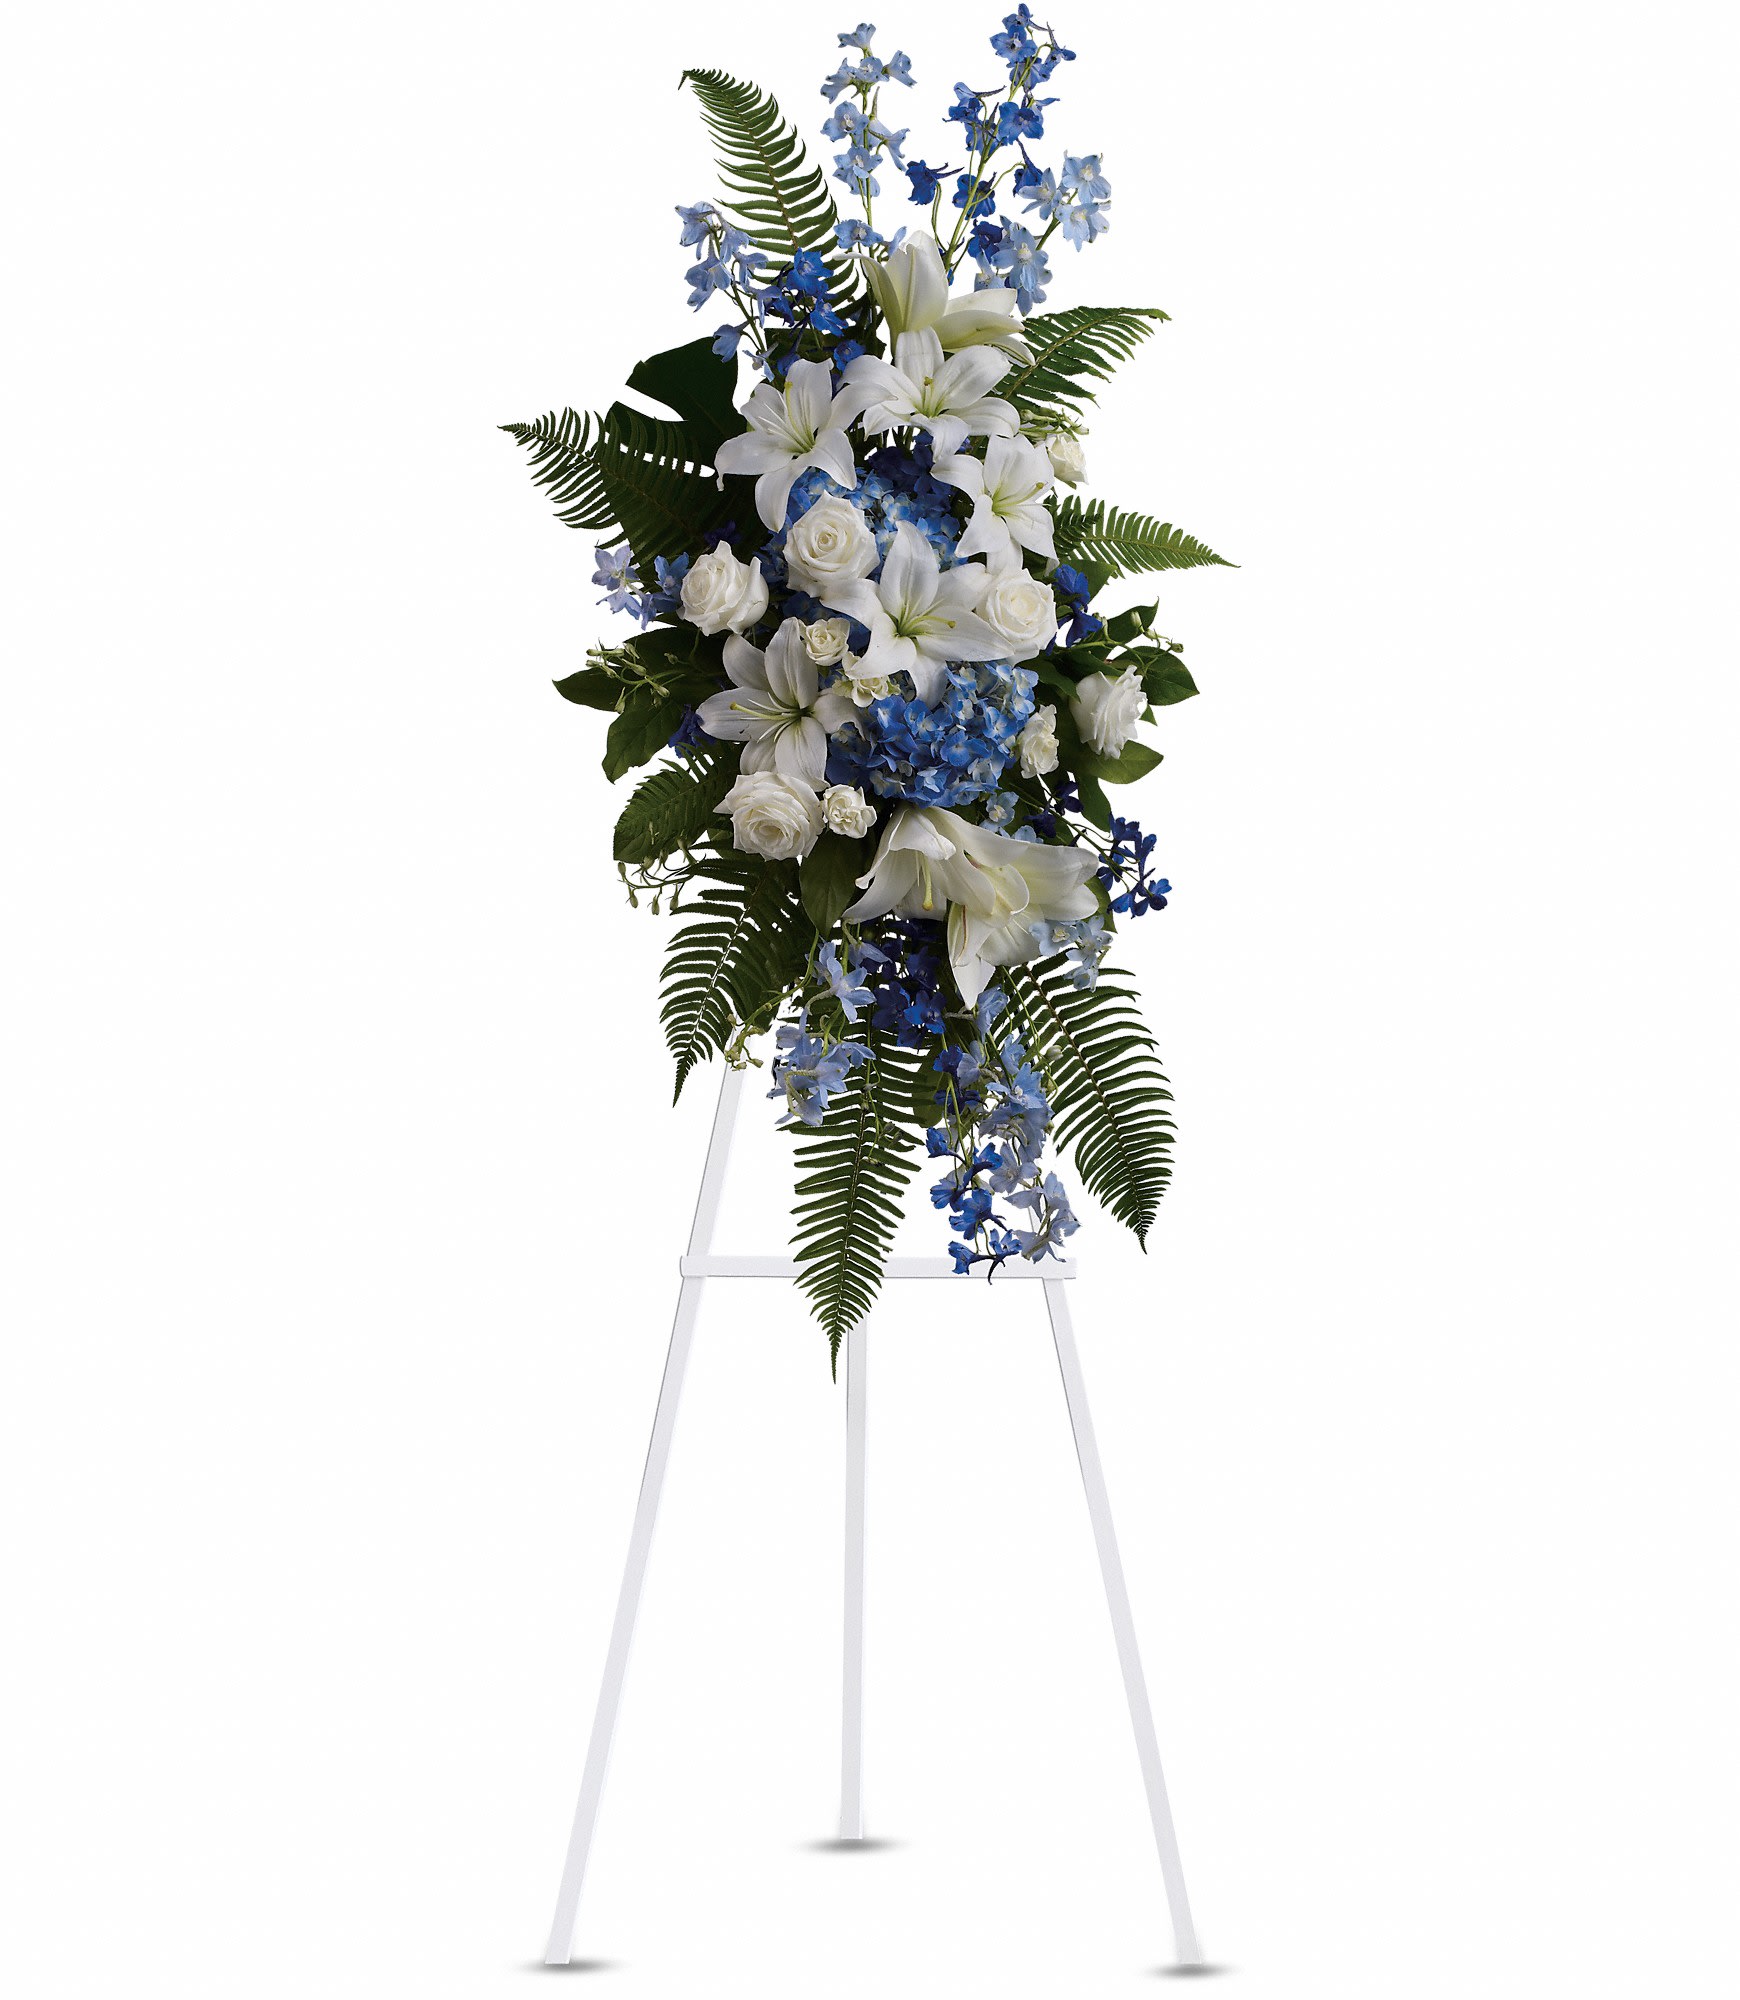 Ocean Breeze Spray - Express deep condolences and strong hopes for the future with an elegant tribute that conveys admiration, affection and respect. 